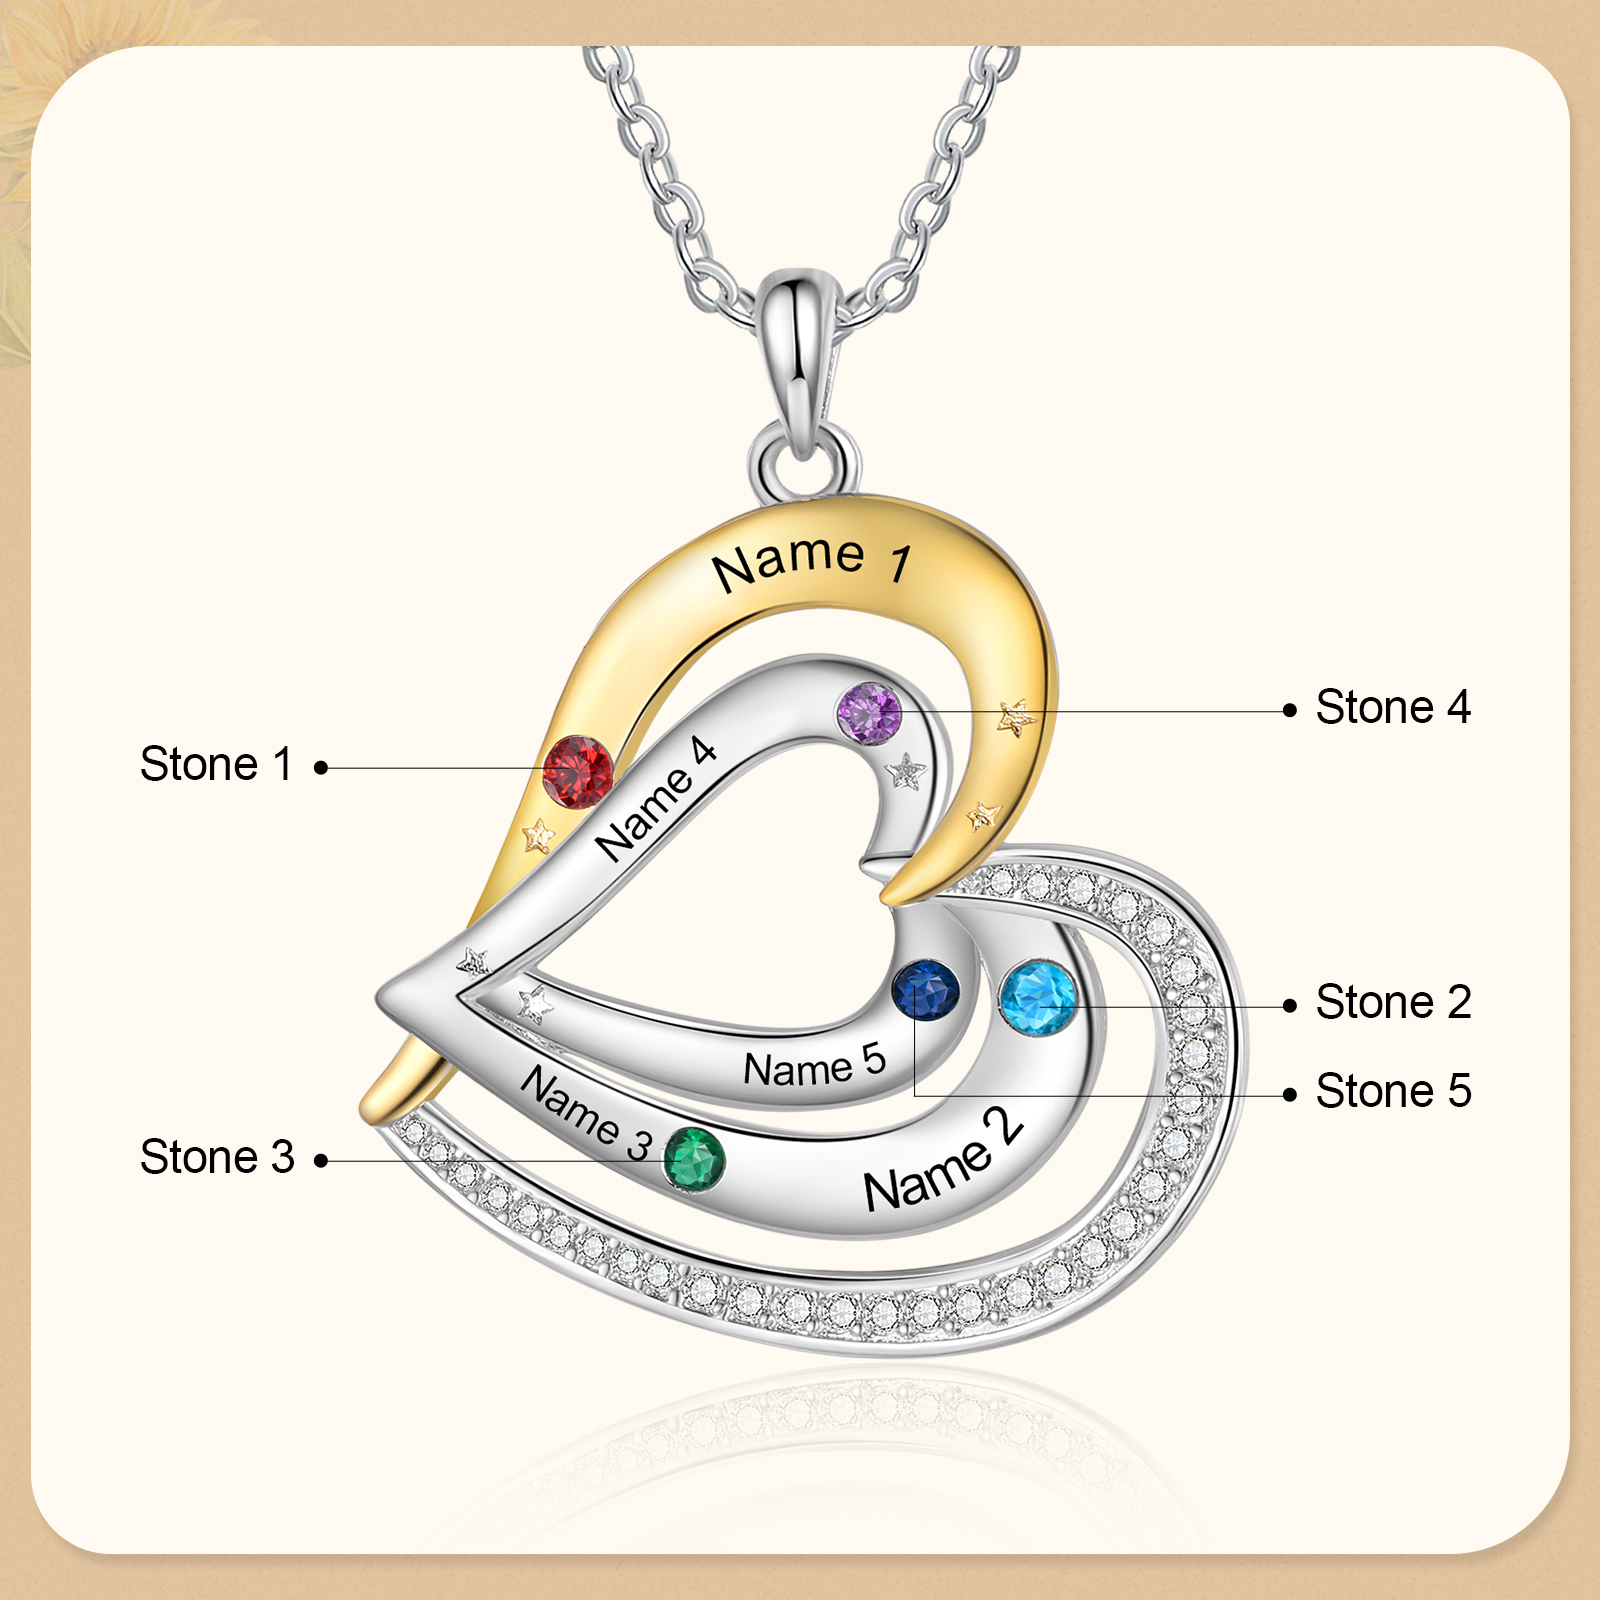 5 Names - Personalized Love Necklace with Customized Name and Birthstone, A Special Gift for Her